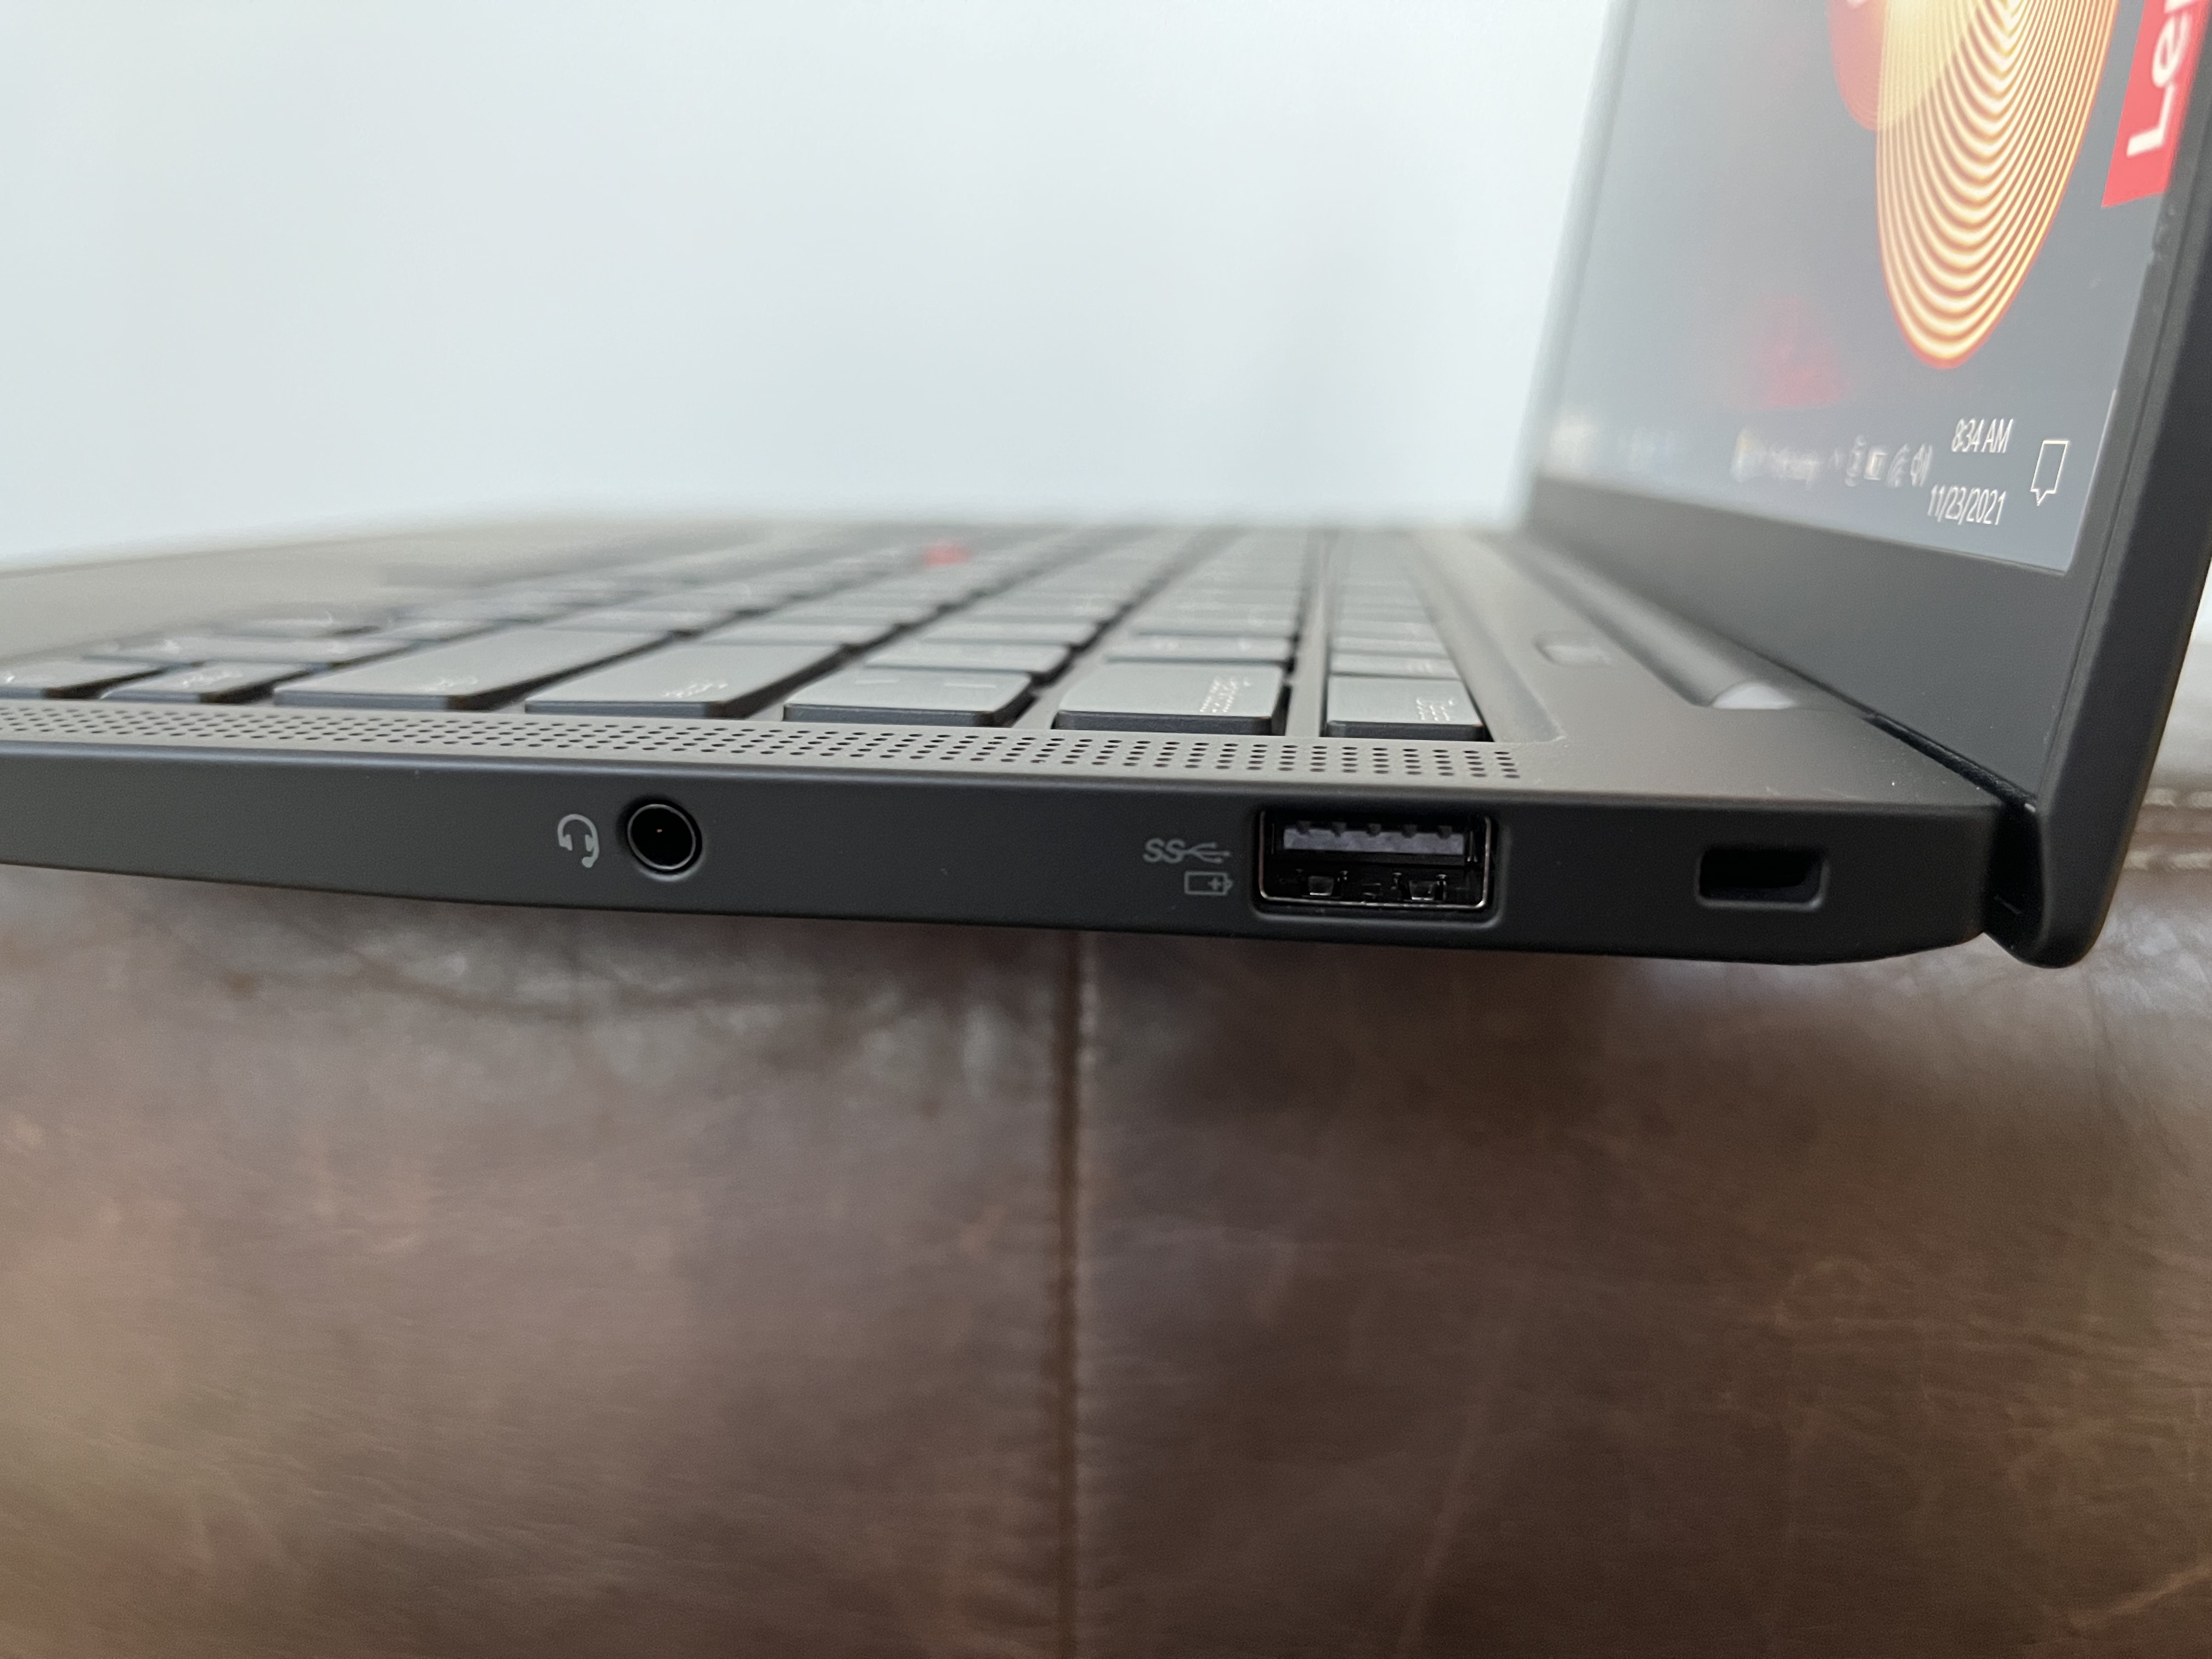 Lenovo ThinkPad X1 Carbon review: Gen 9 goes to 16:10 | PCWorld